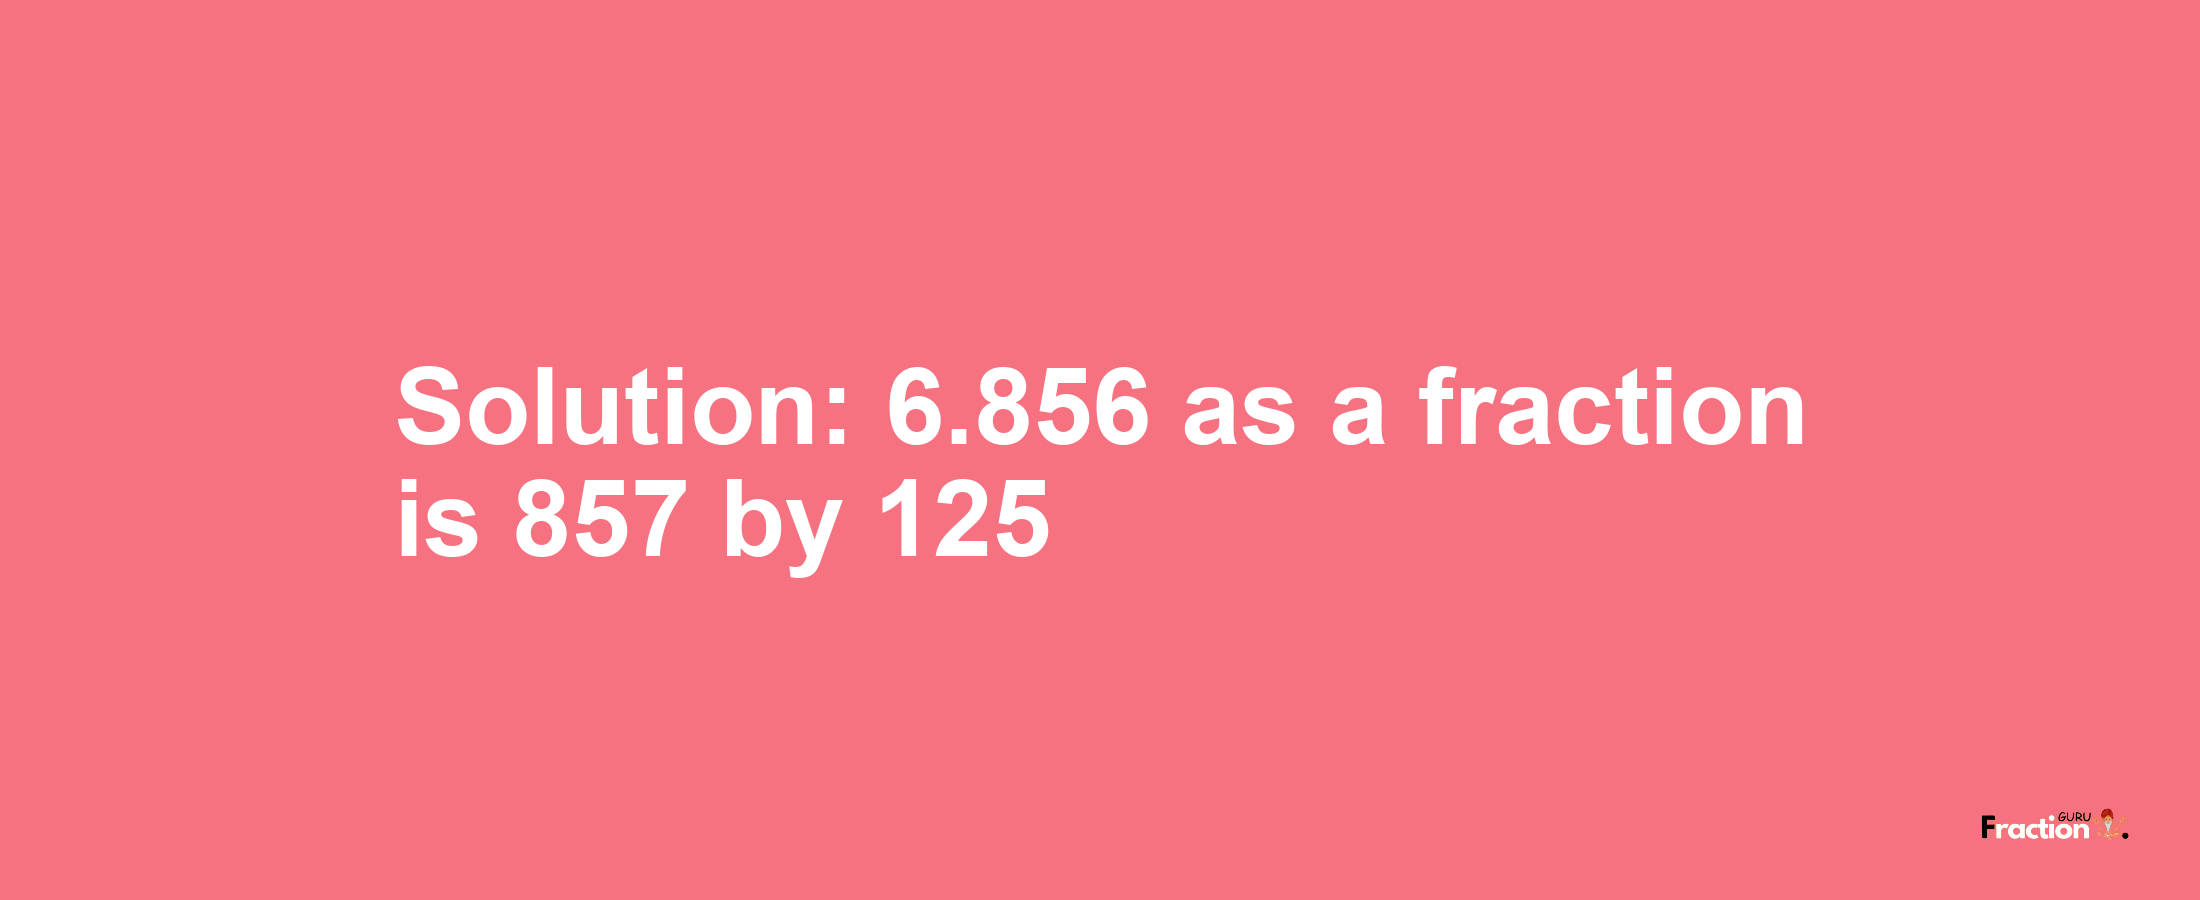 Solution:6.856 as a fraction is 857/125